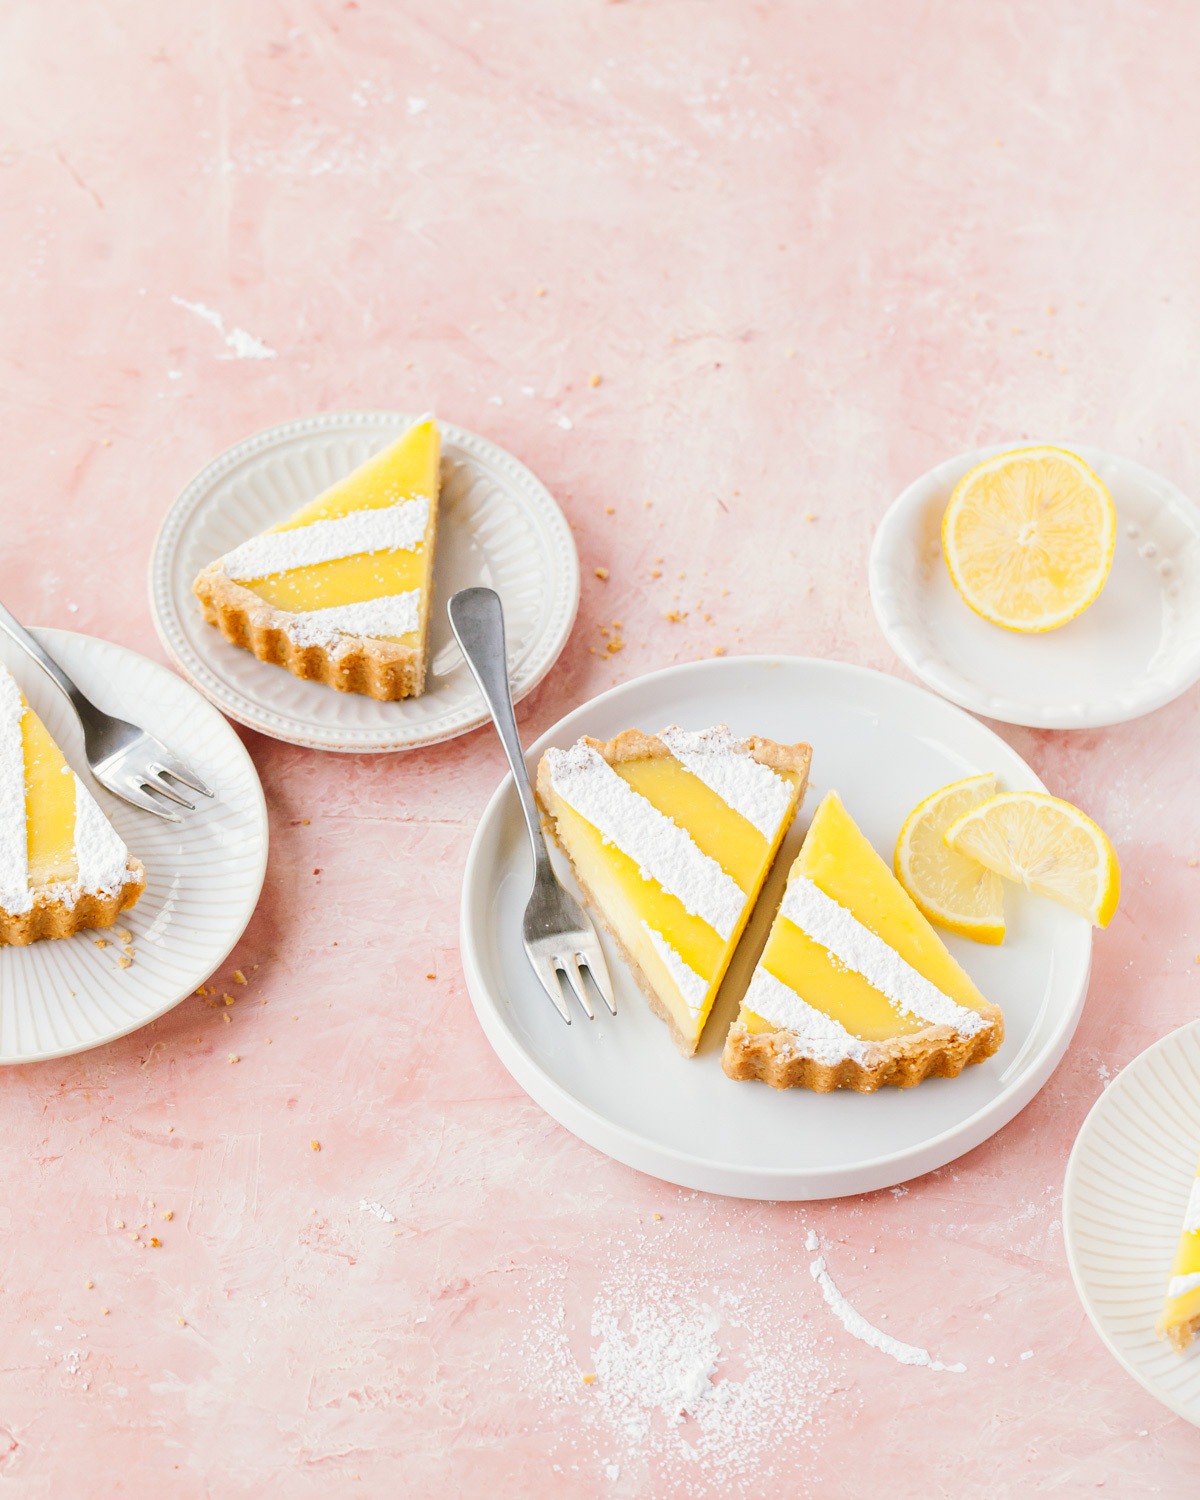 Slices of lemon tart with powdered sugar on top